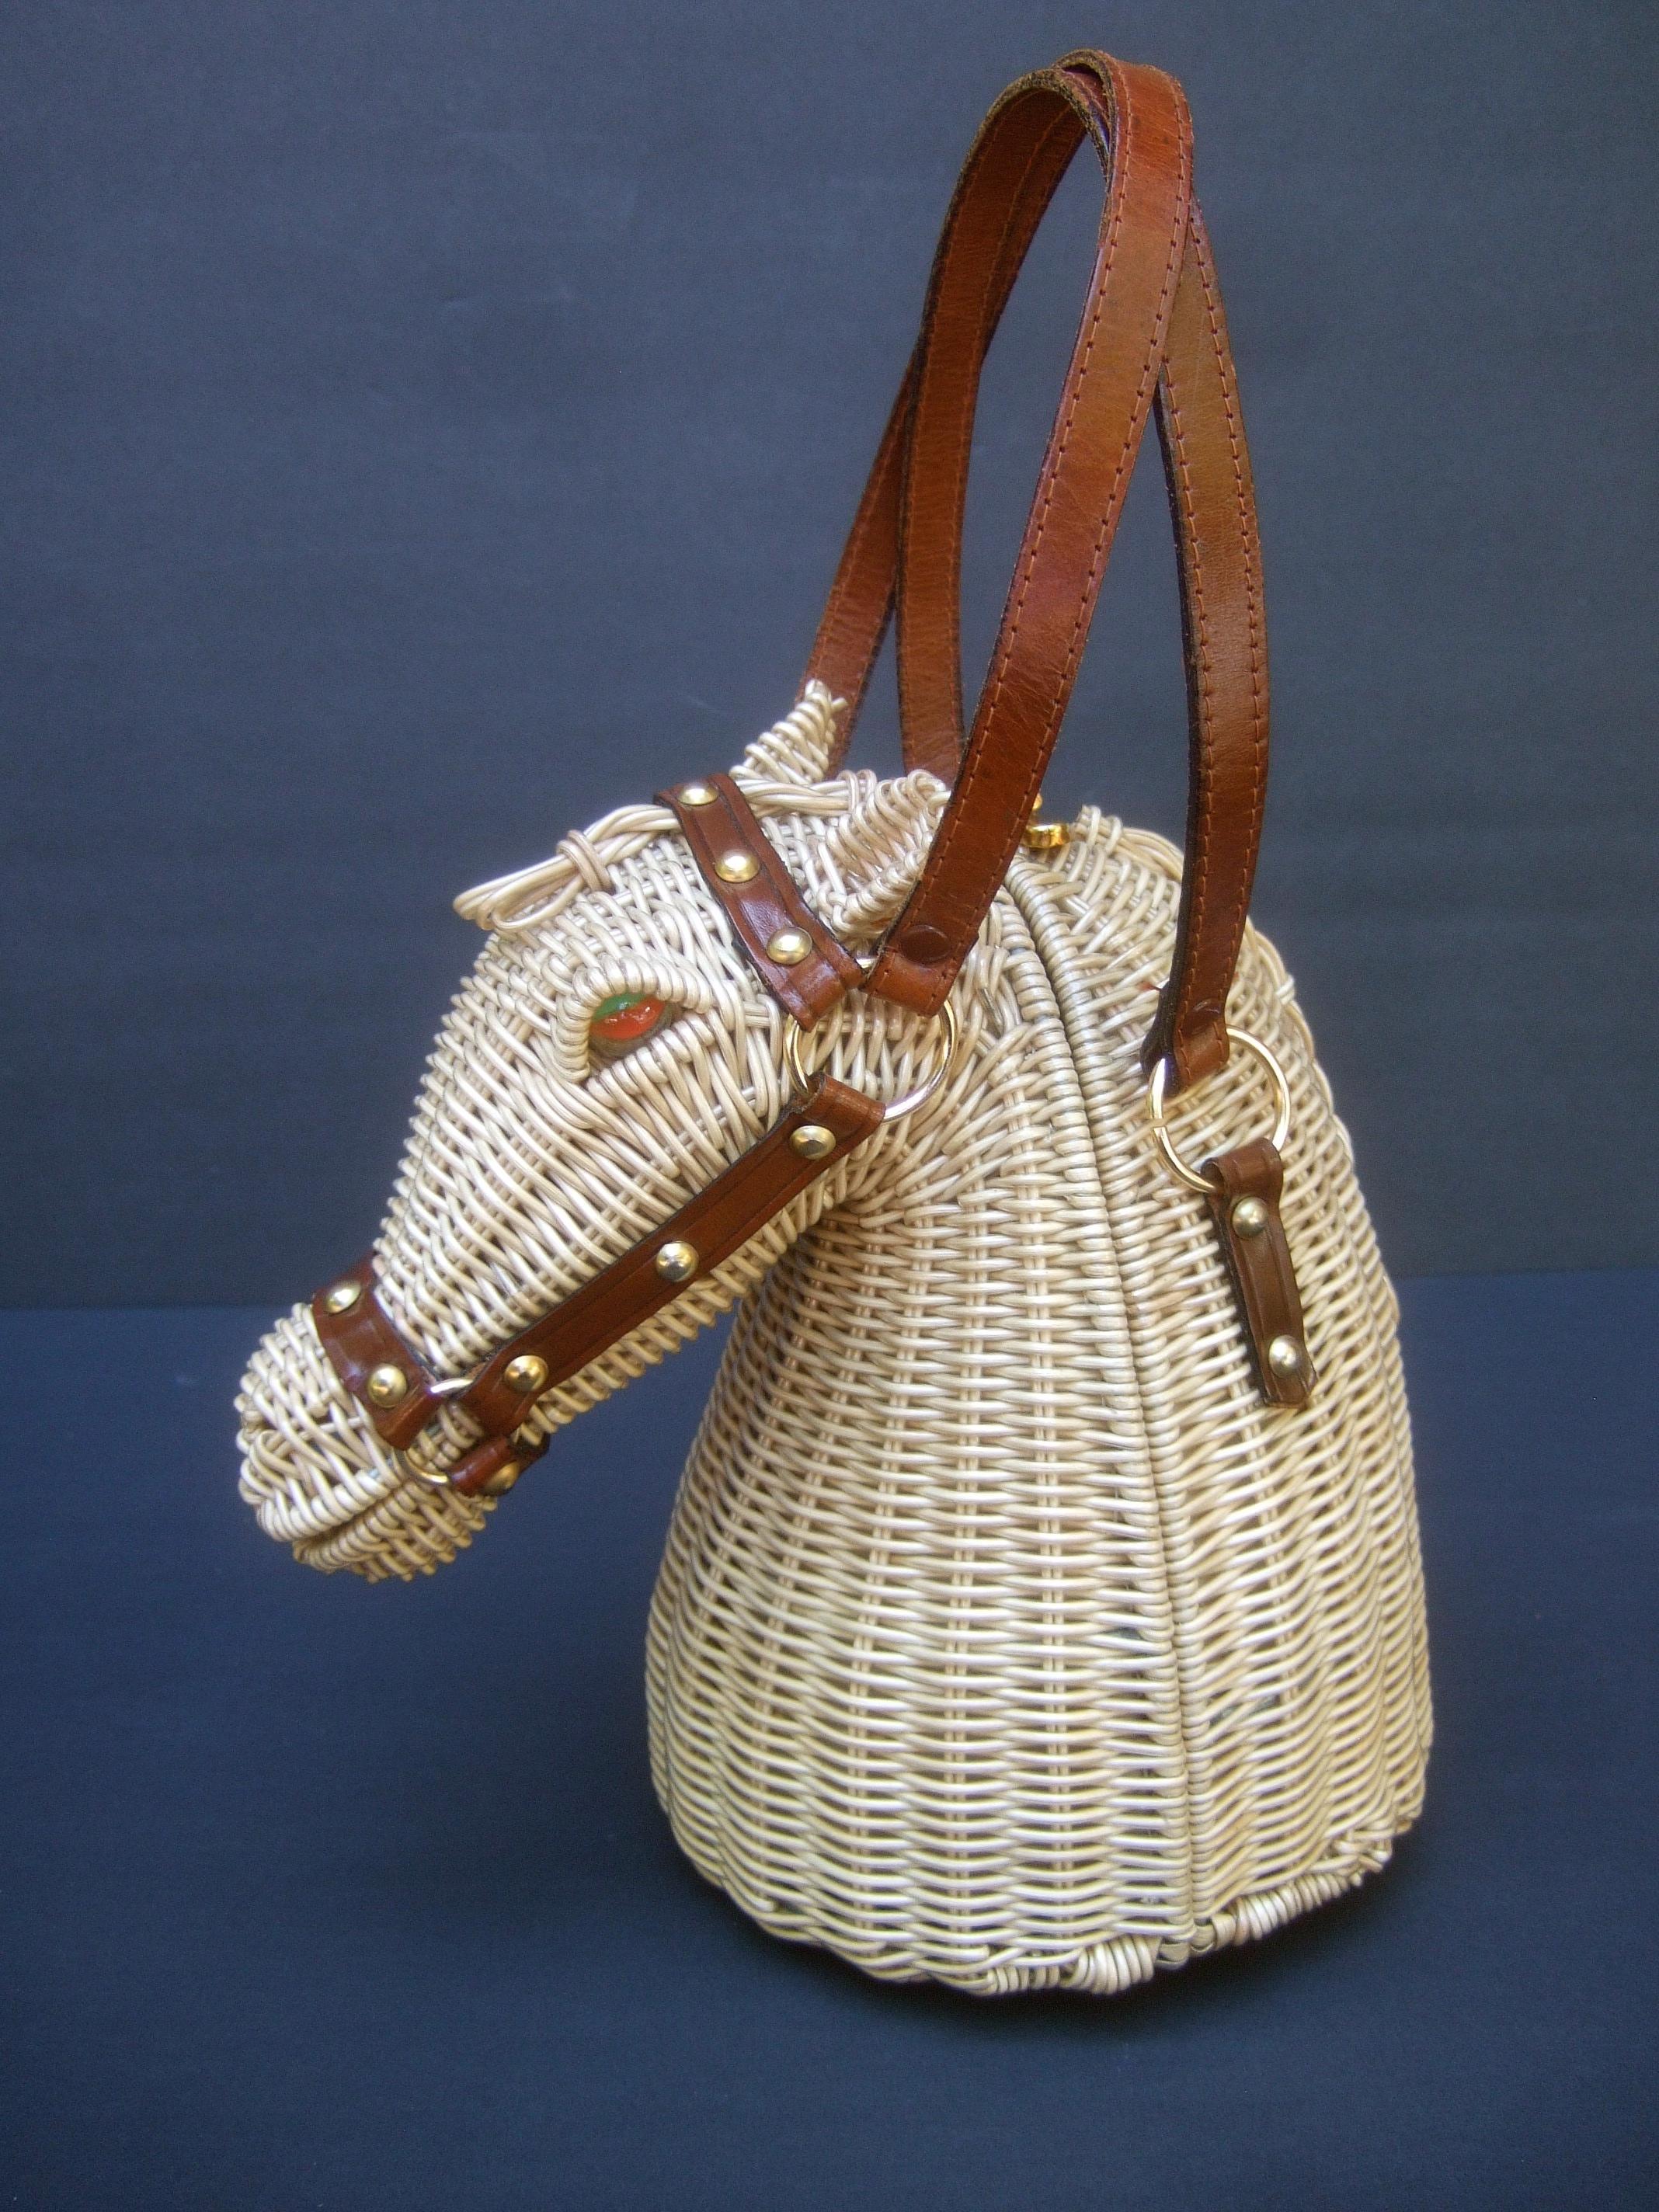 Extremely rare figural wicker artisan horse design handbag c 1970

The extraordinary handbag is designed in the shape of a majestic horse figure; embellished with fiery red & green marble glass eyes. Adorned with brown leather bridals with brass